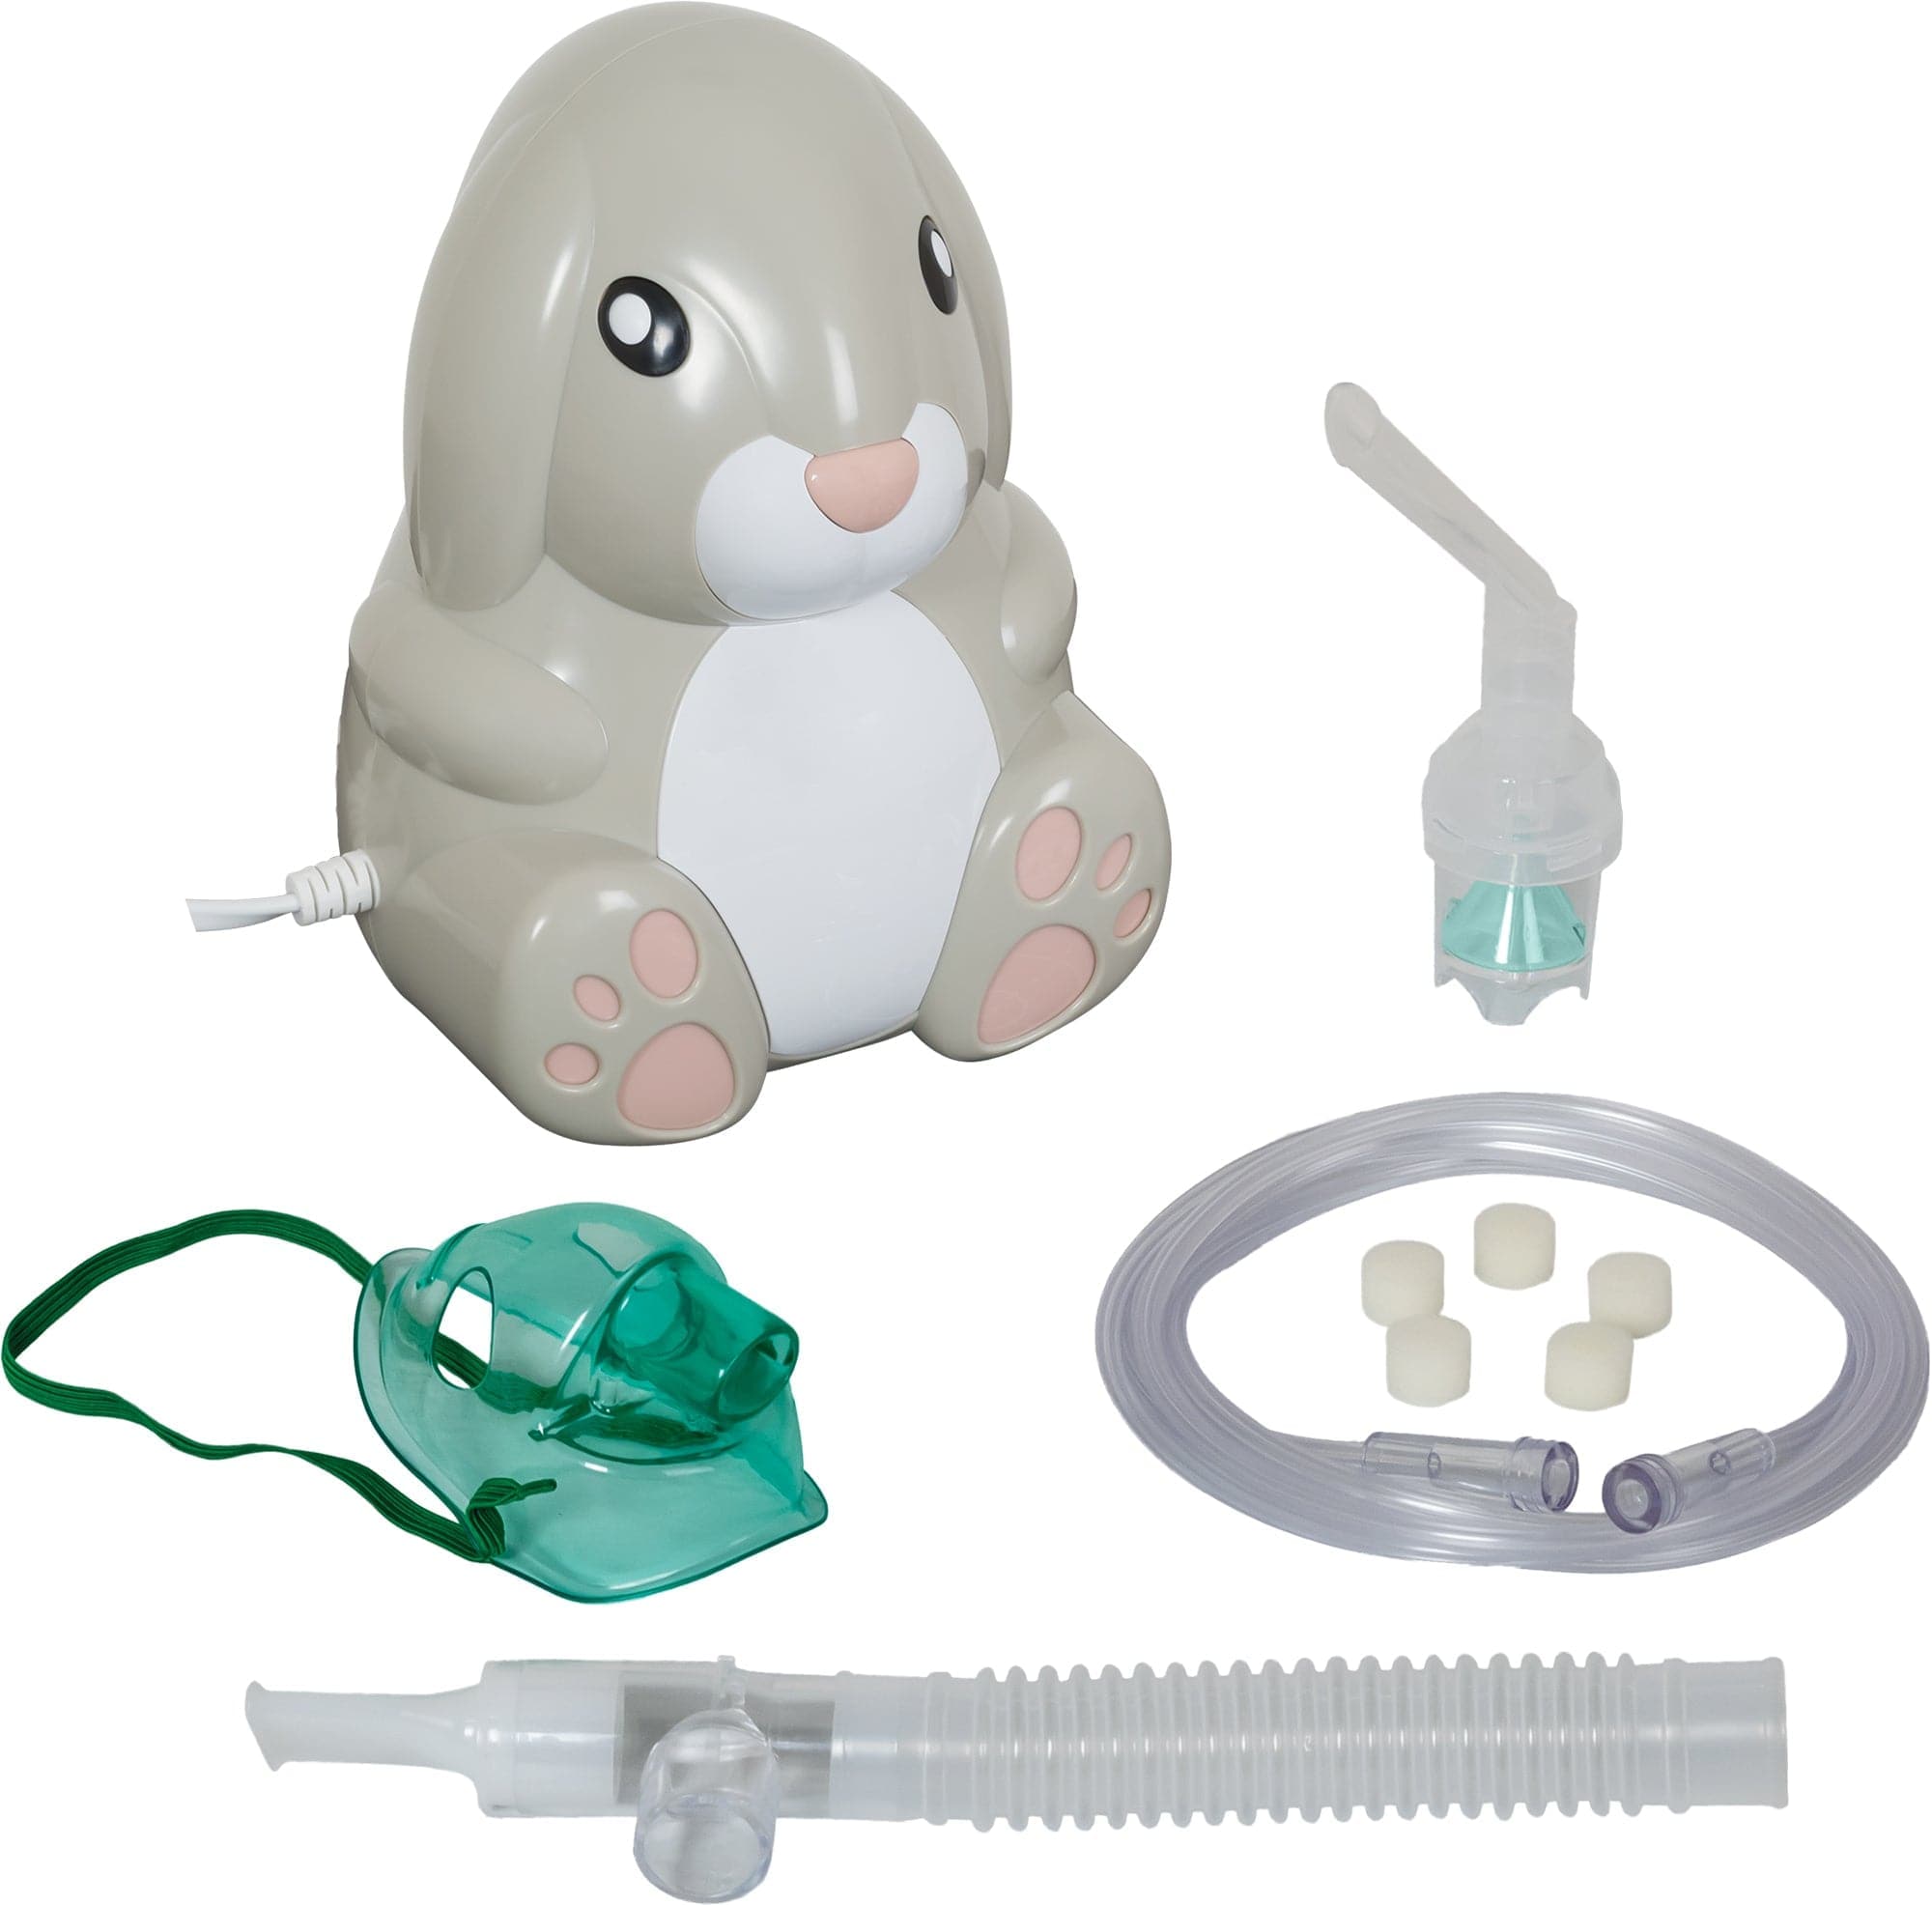 Compass Health Pediatric Compressors Compass Health Roscoe Bunny Pediatric Nebulizer System with Disposable Neb Kit